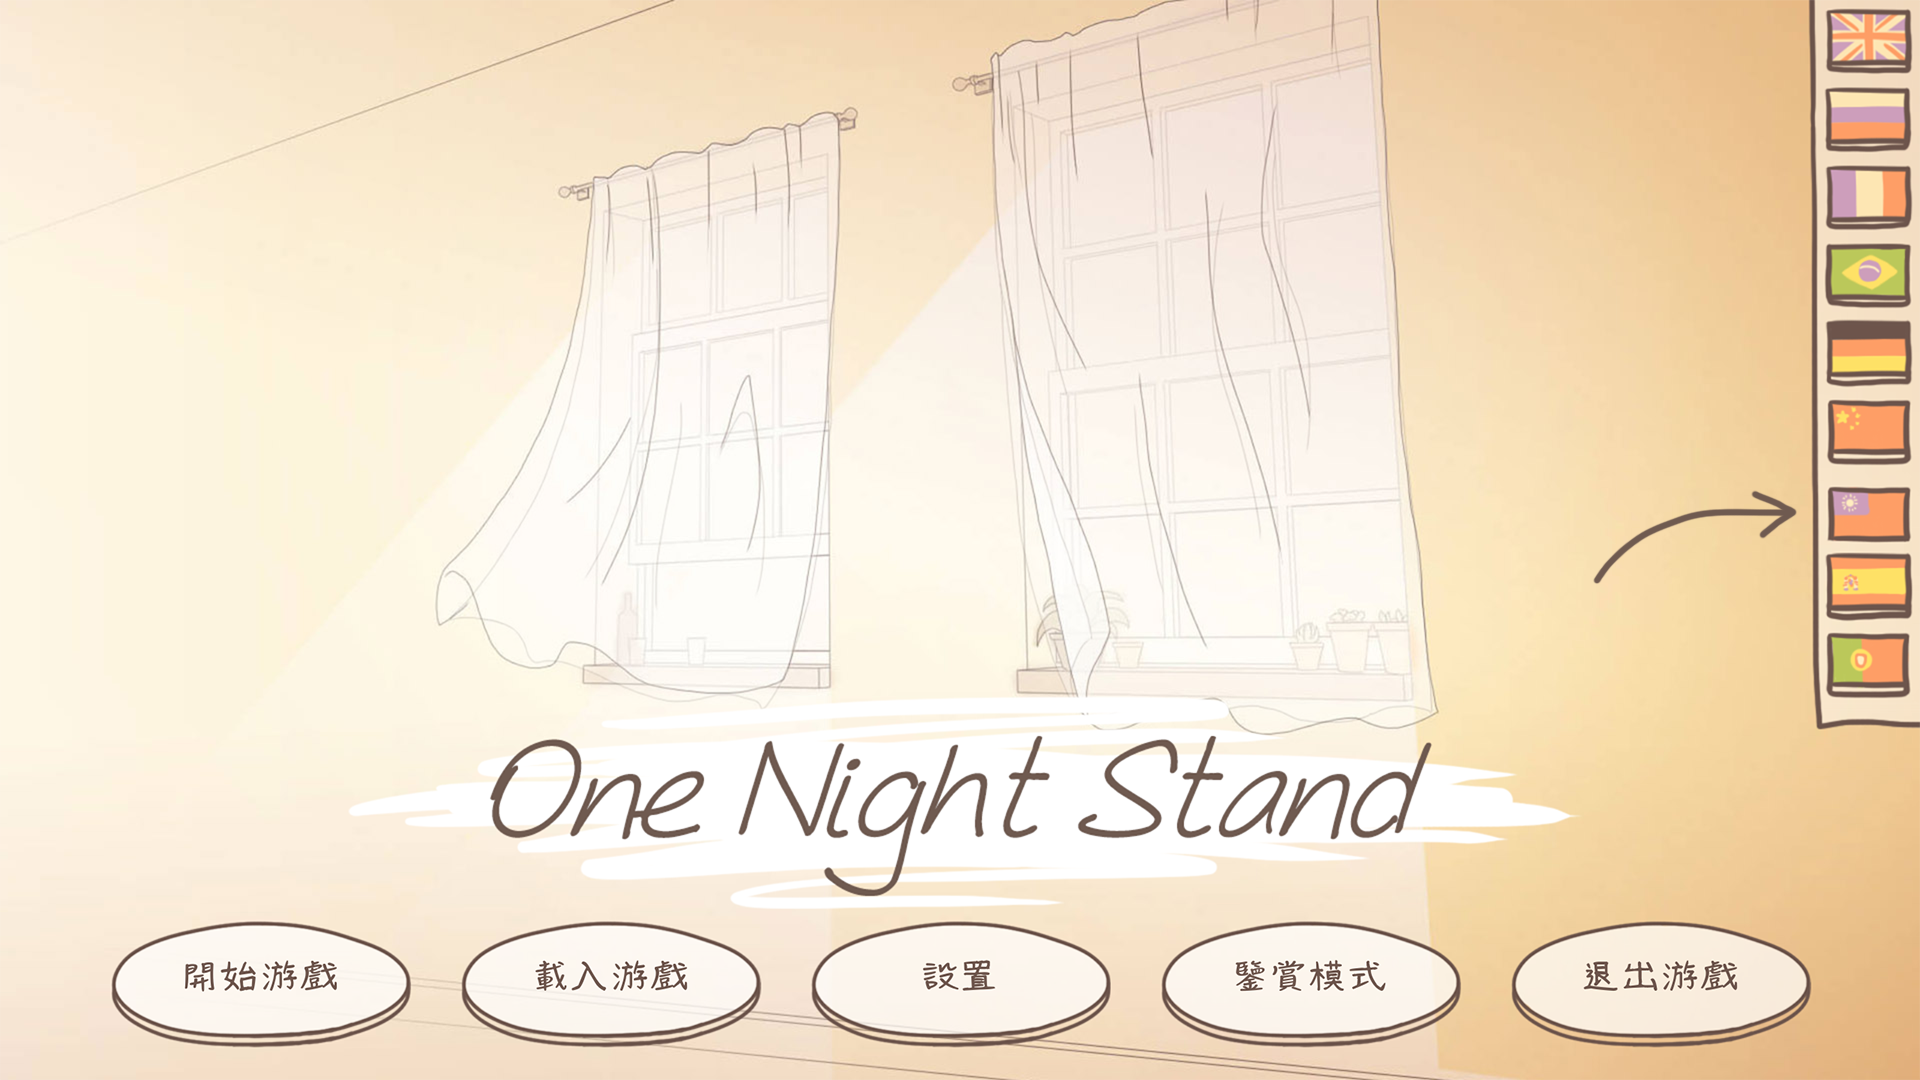 I am happy to announce that One Night Stand is now playable in Traditional ...